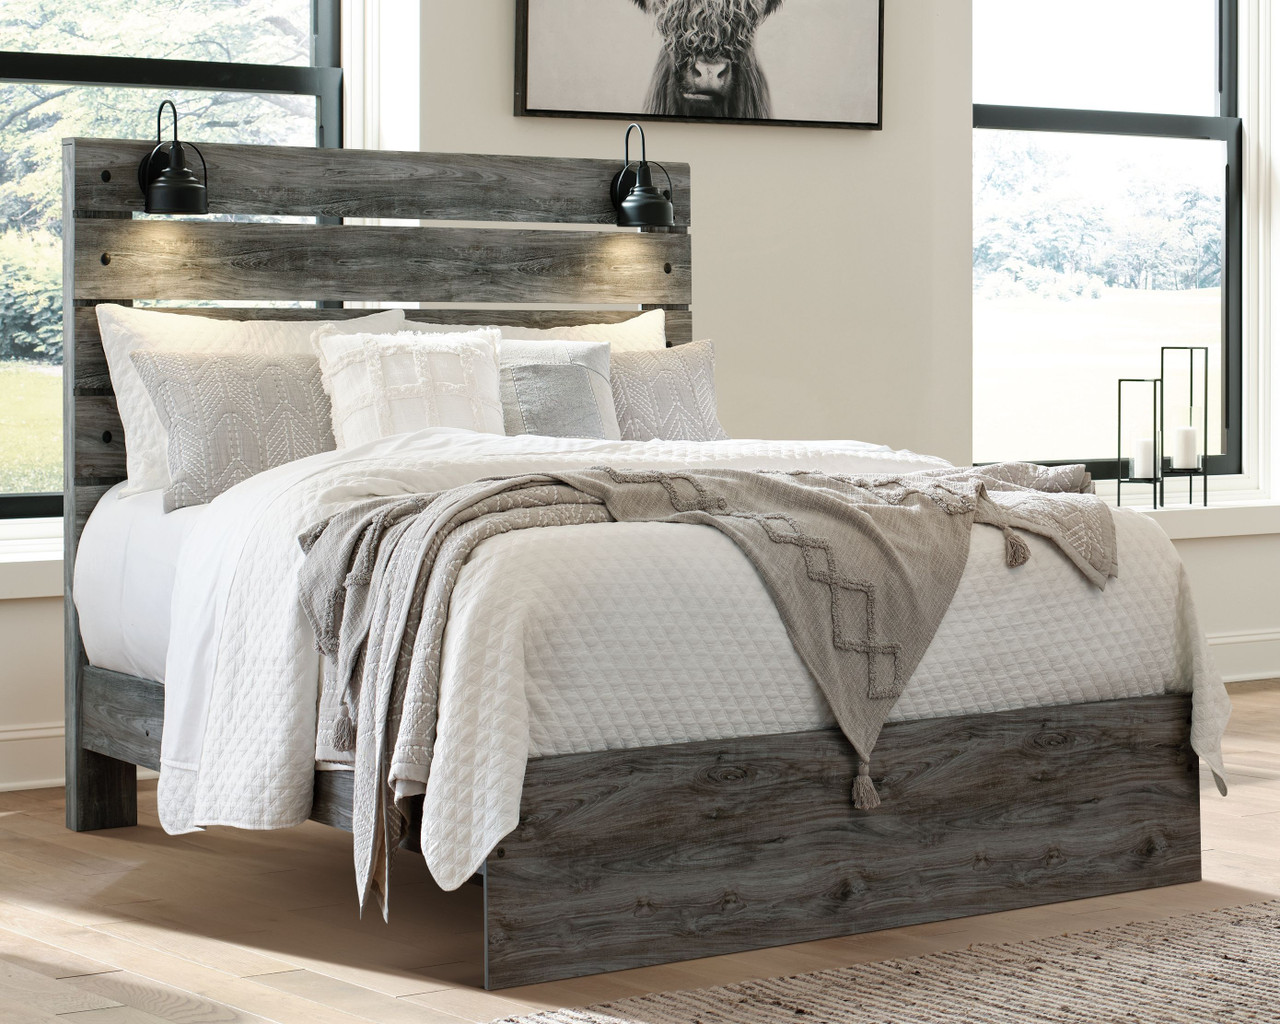 The Baystorm Gray Queen Panel Bed Footboard Slat is available at